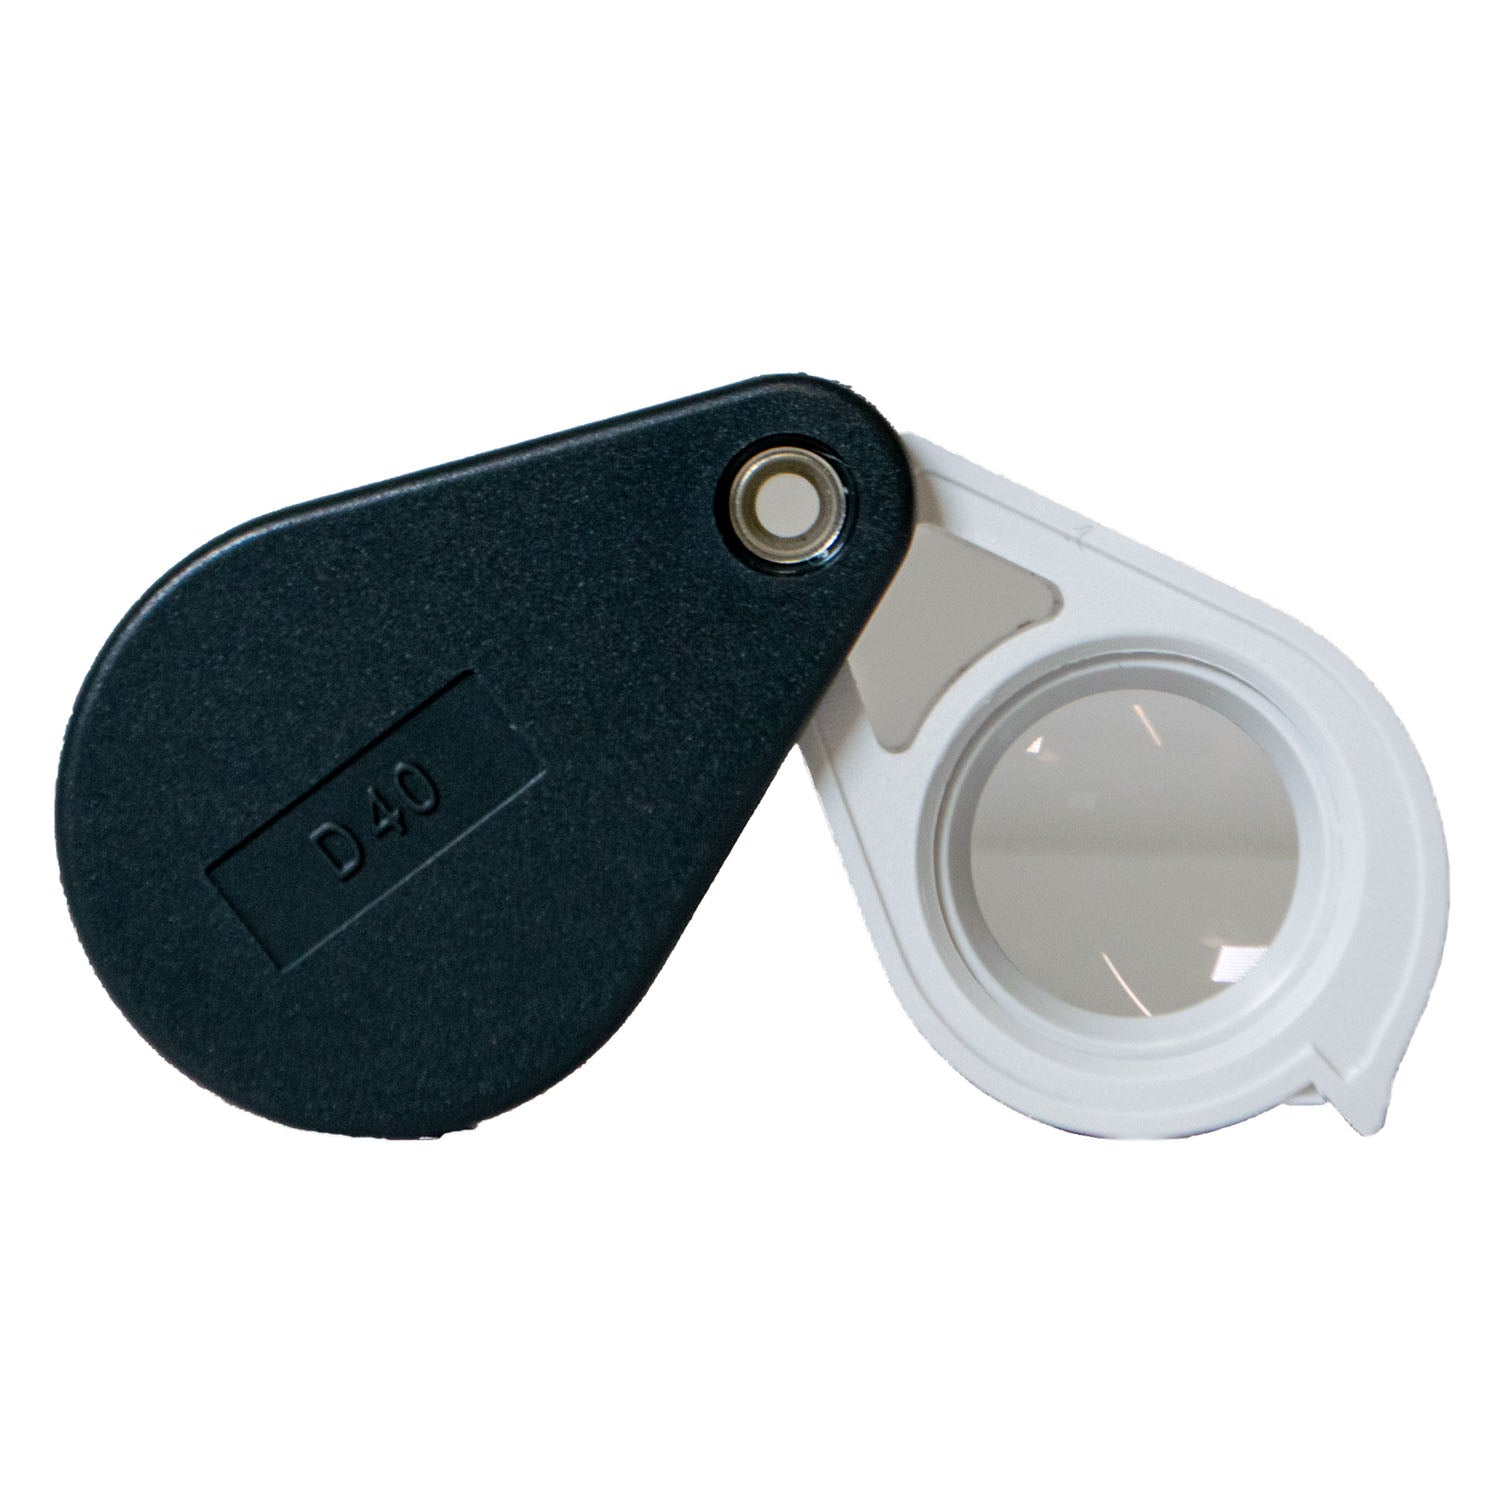 ZEISS Magnifying glass Aplanatic-achromatic Pocket Magnifiers